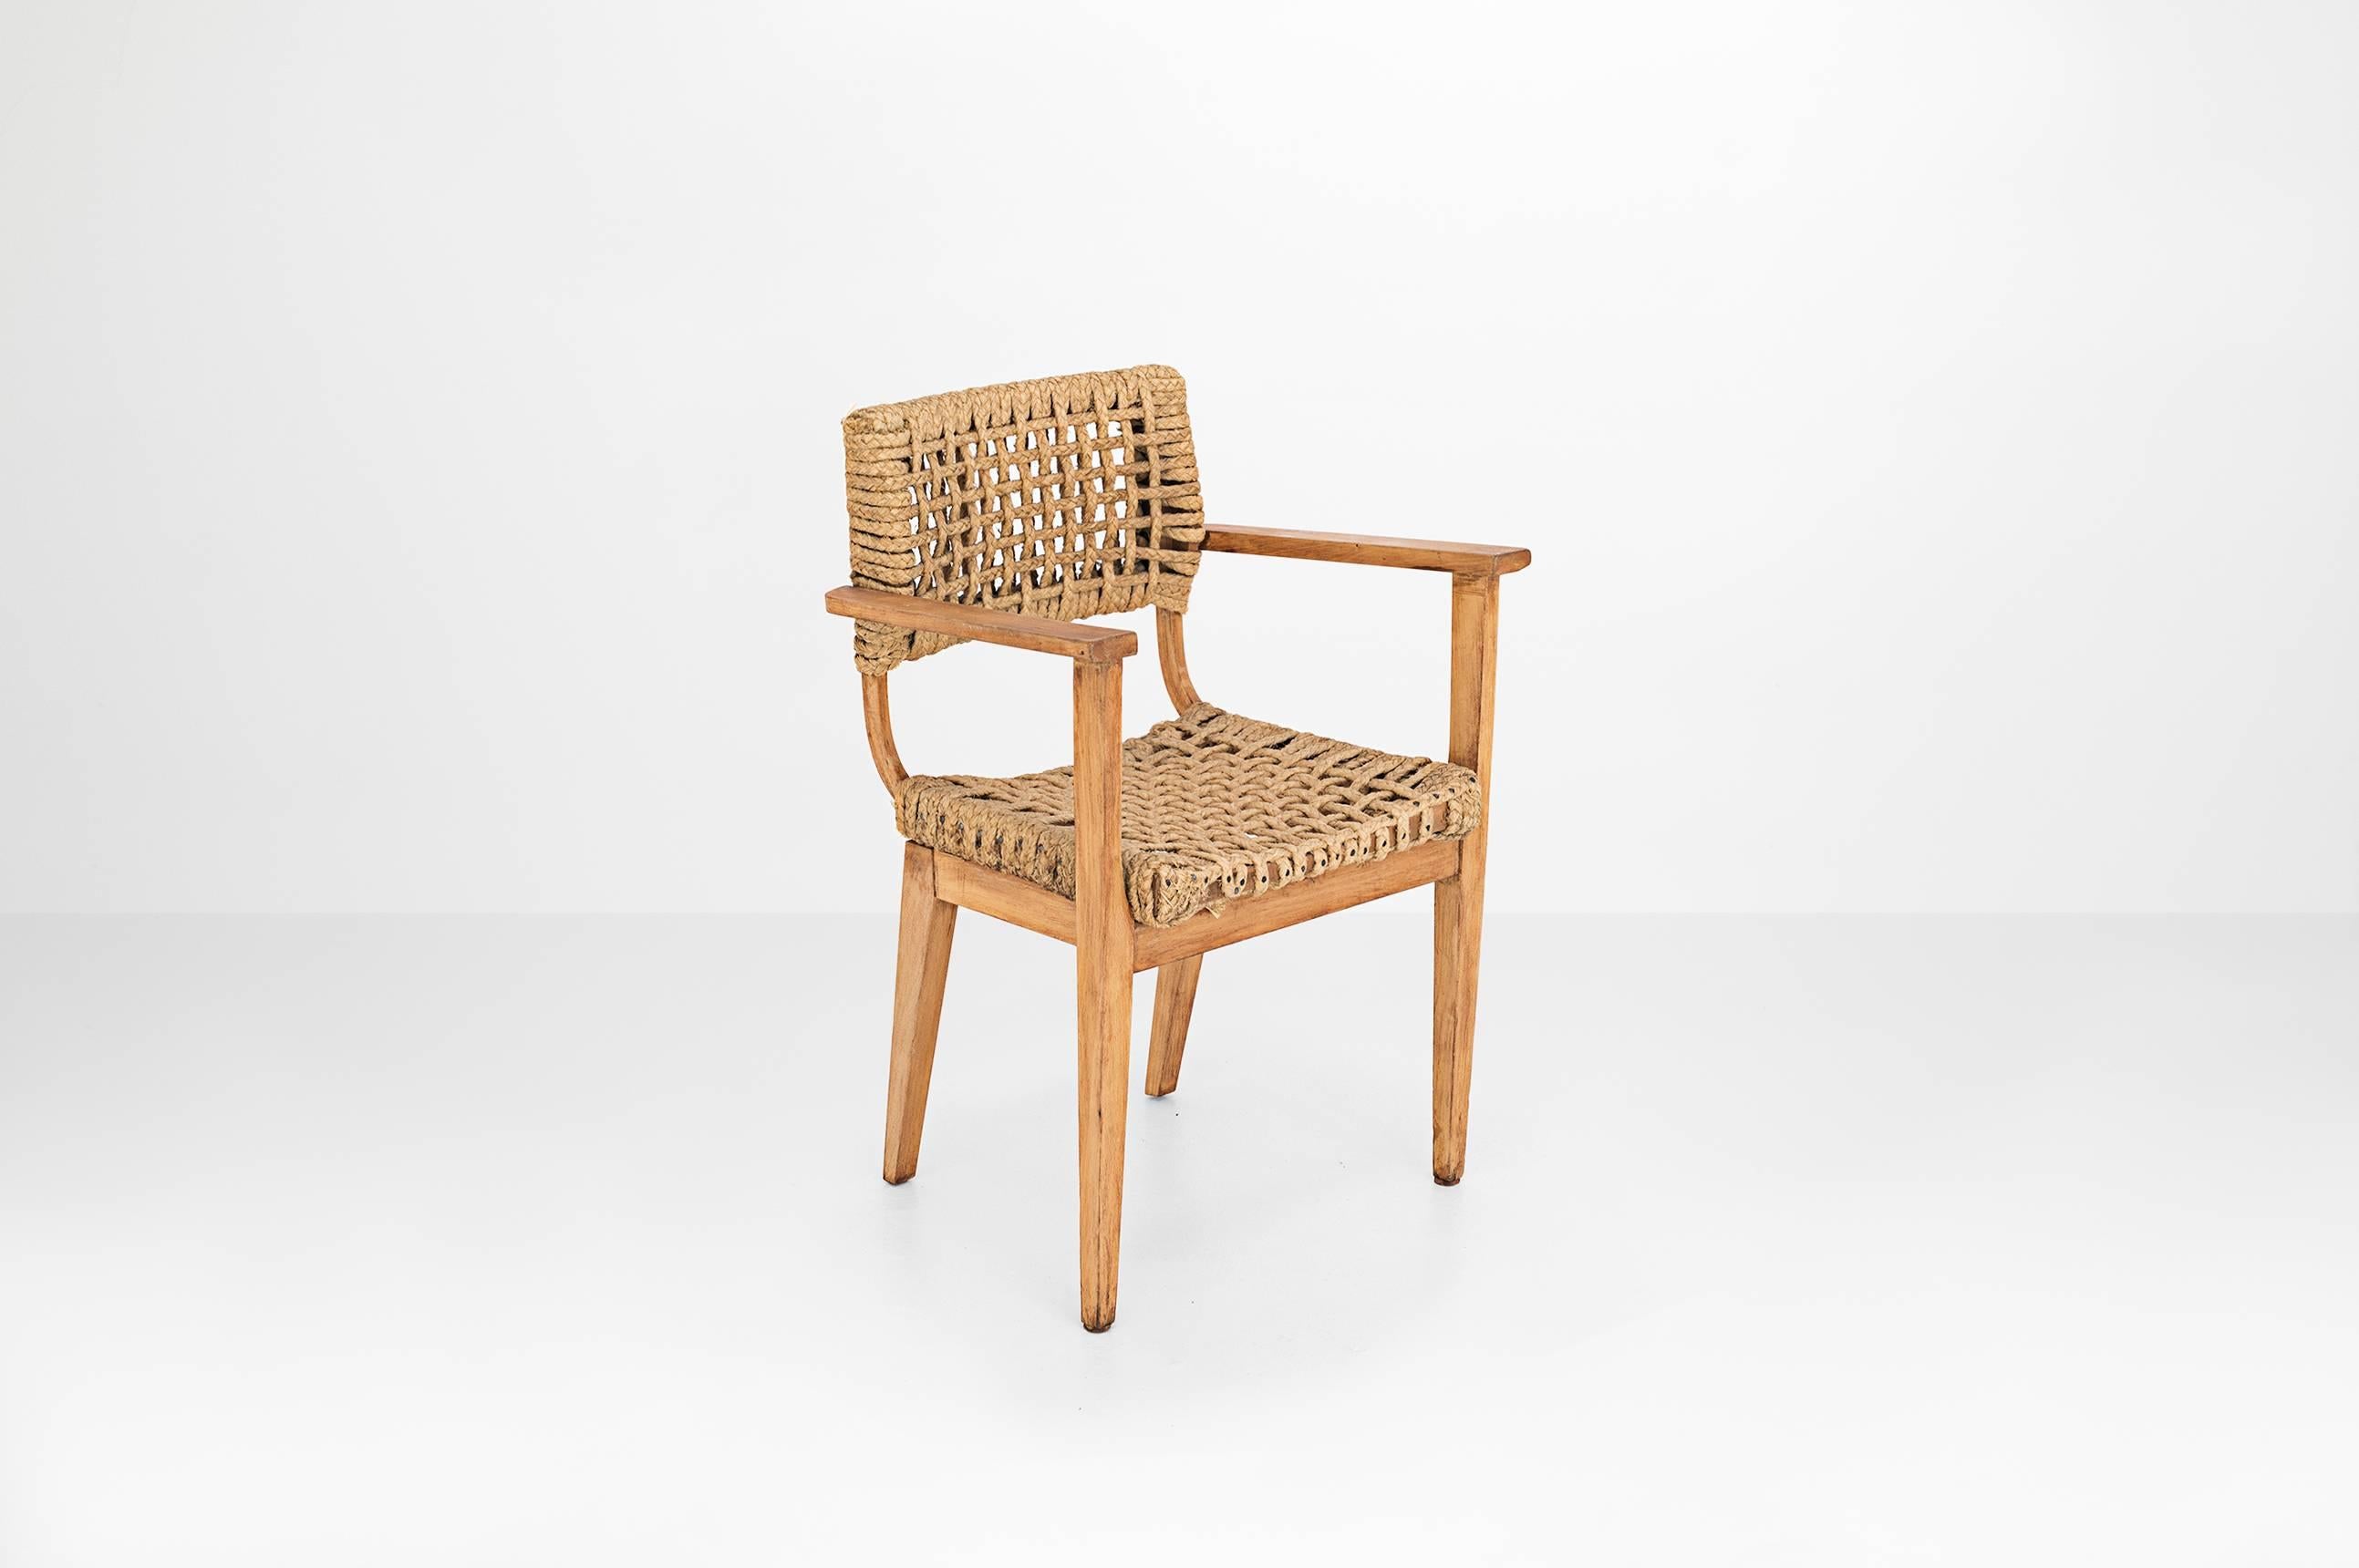 Adrian & Frida Audoux-Minet

Dining chair
Manufactured by Vibo Vesoul
Marseille, France 1960
Rope, wood

Measurements:
75 cm x 51 cm x 75 cm
29.5 in x 20 in x 29.5 H in

Condition:
Perfect condition.